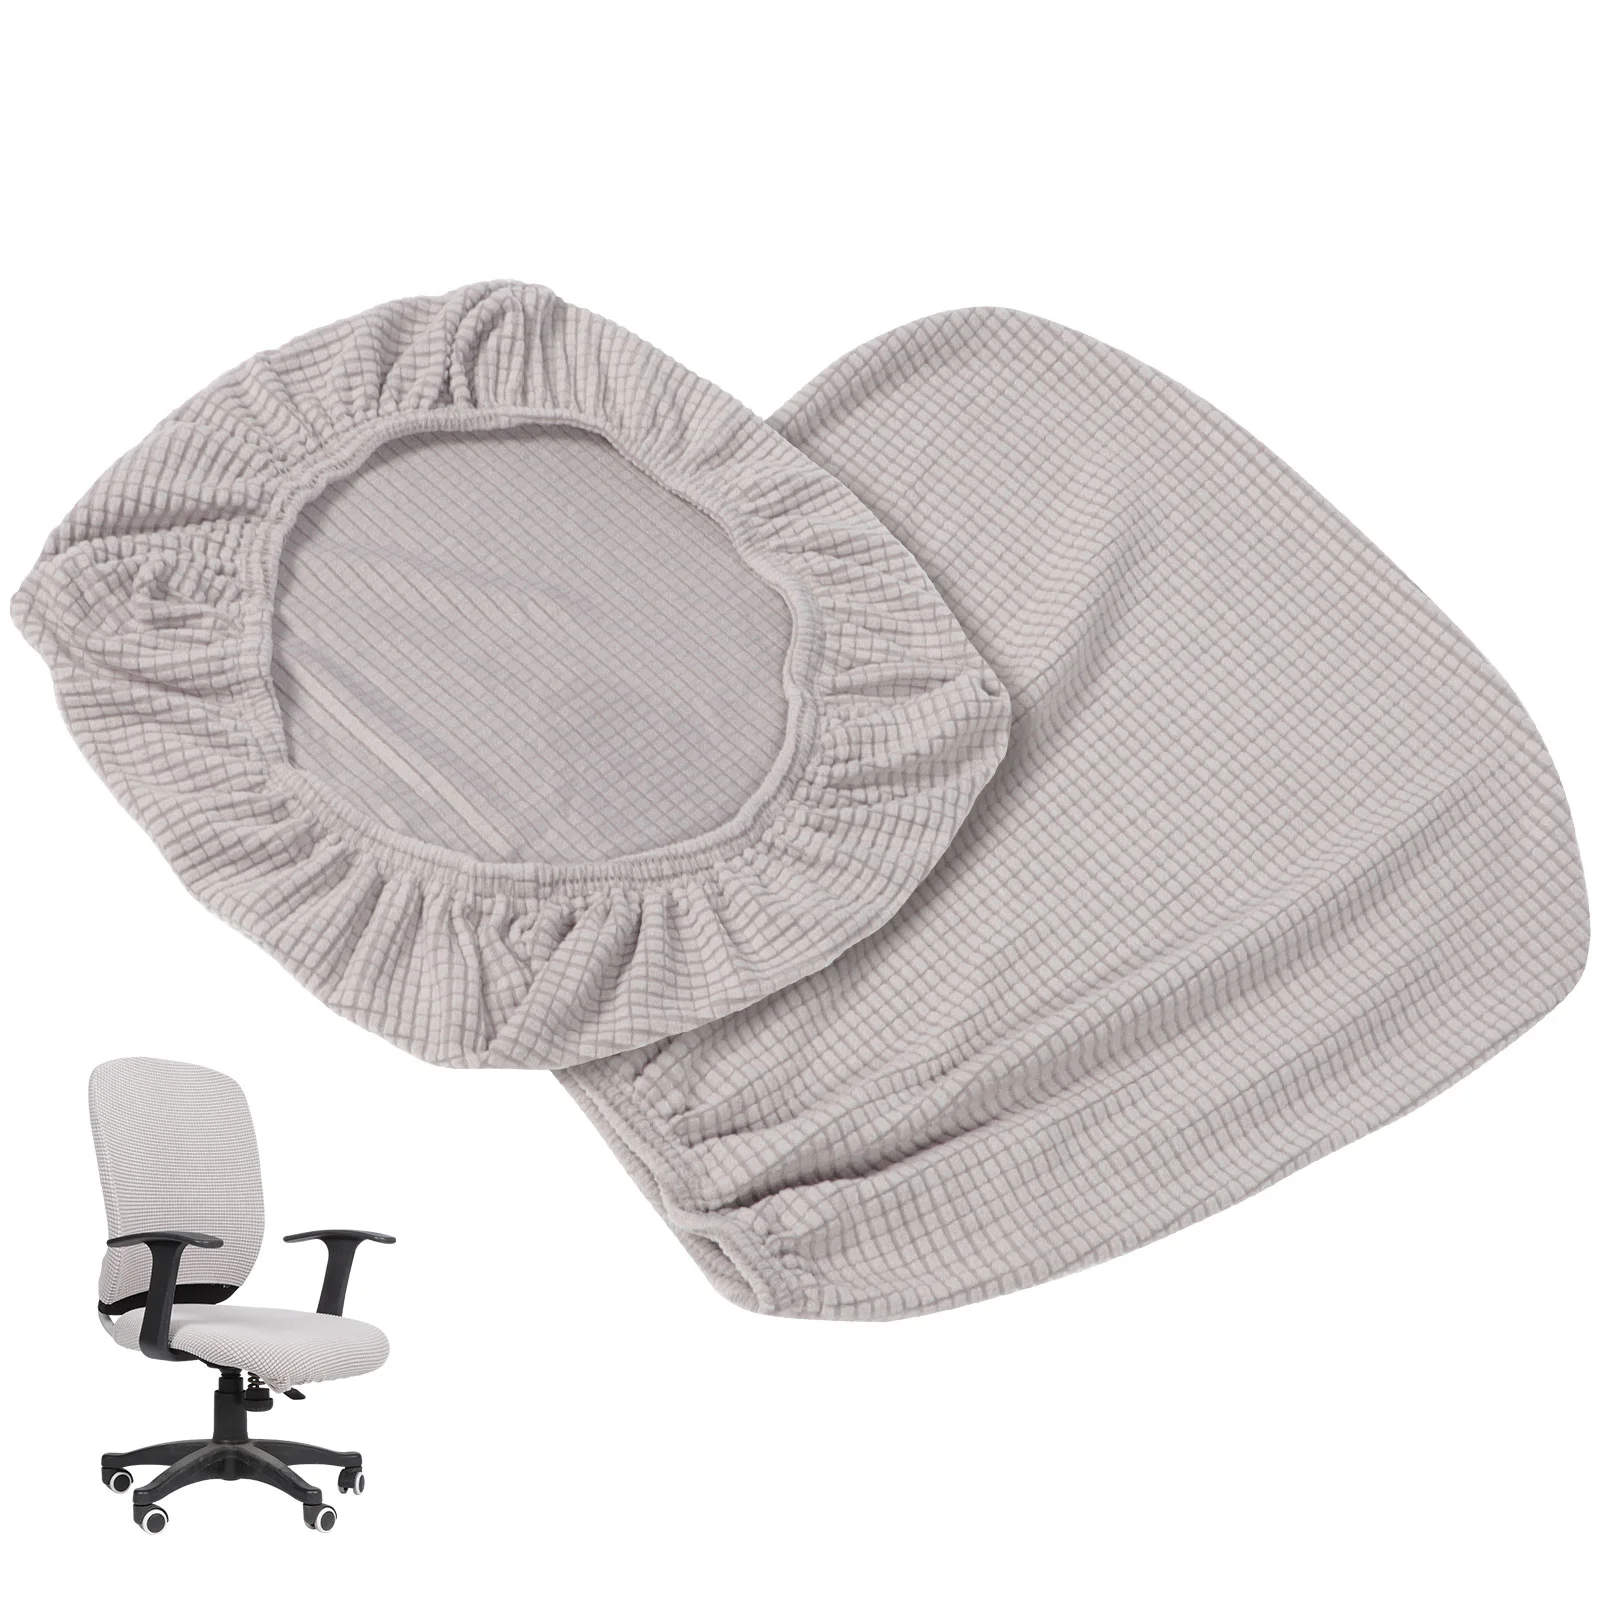 

Chair Covers Cover Slipcover Desk Computer Office Protector Seats Seat Dining Rotating Stretch Elastic Backrest Set Removable